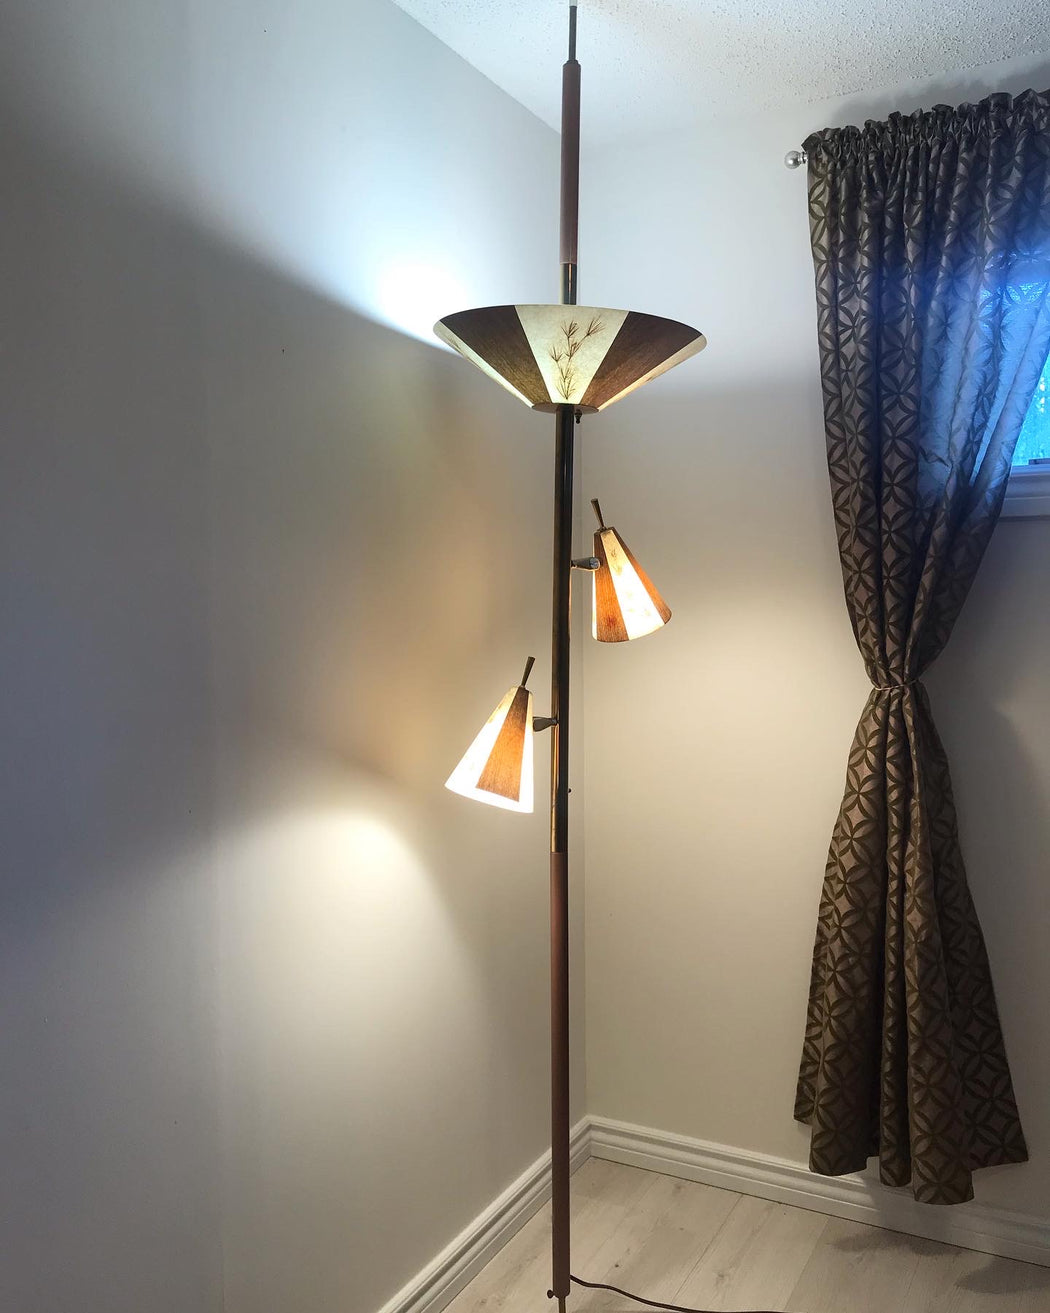 1960s Tension Pole Lamp